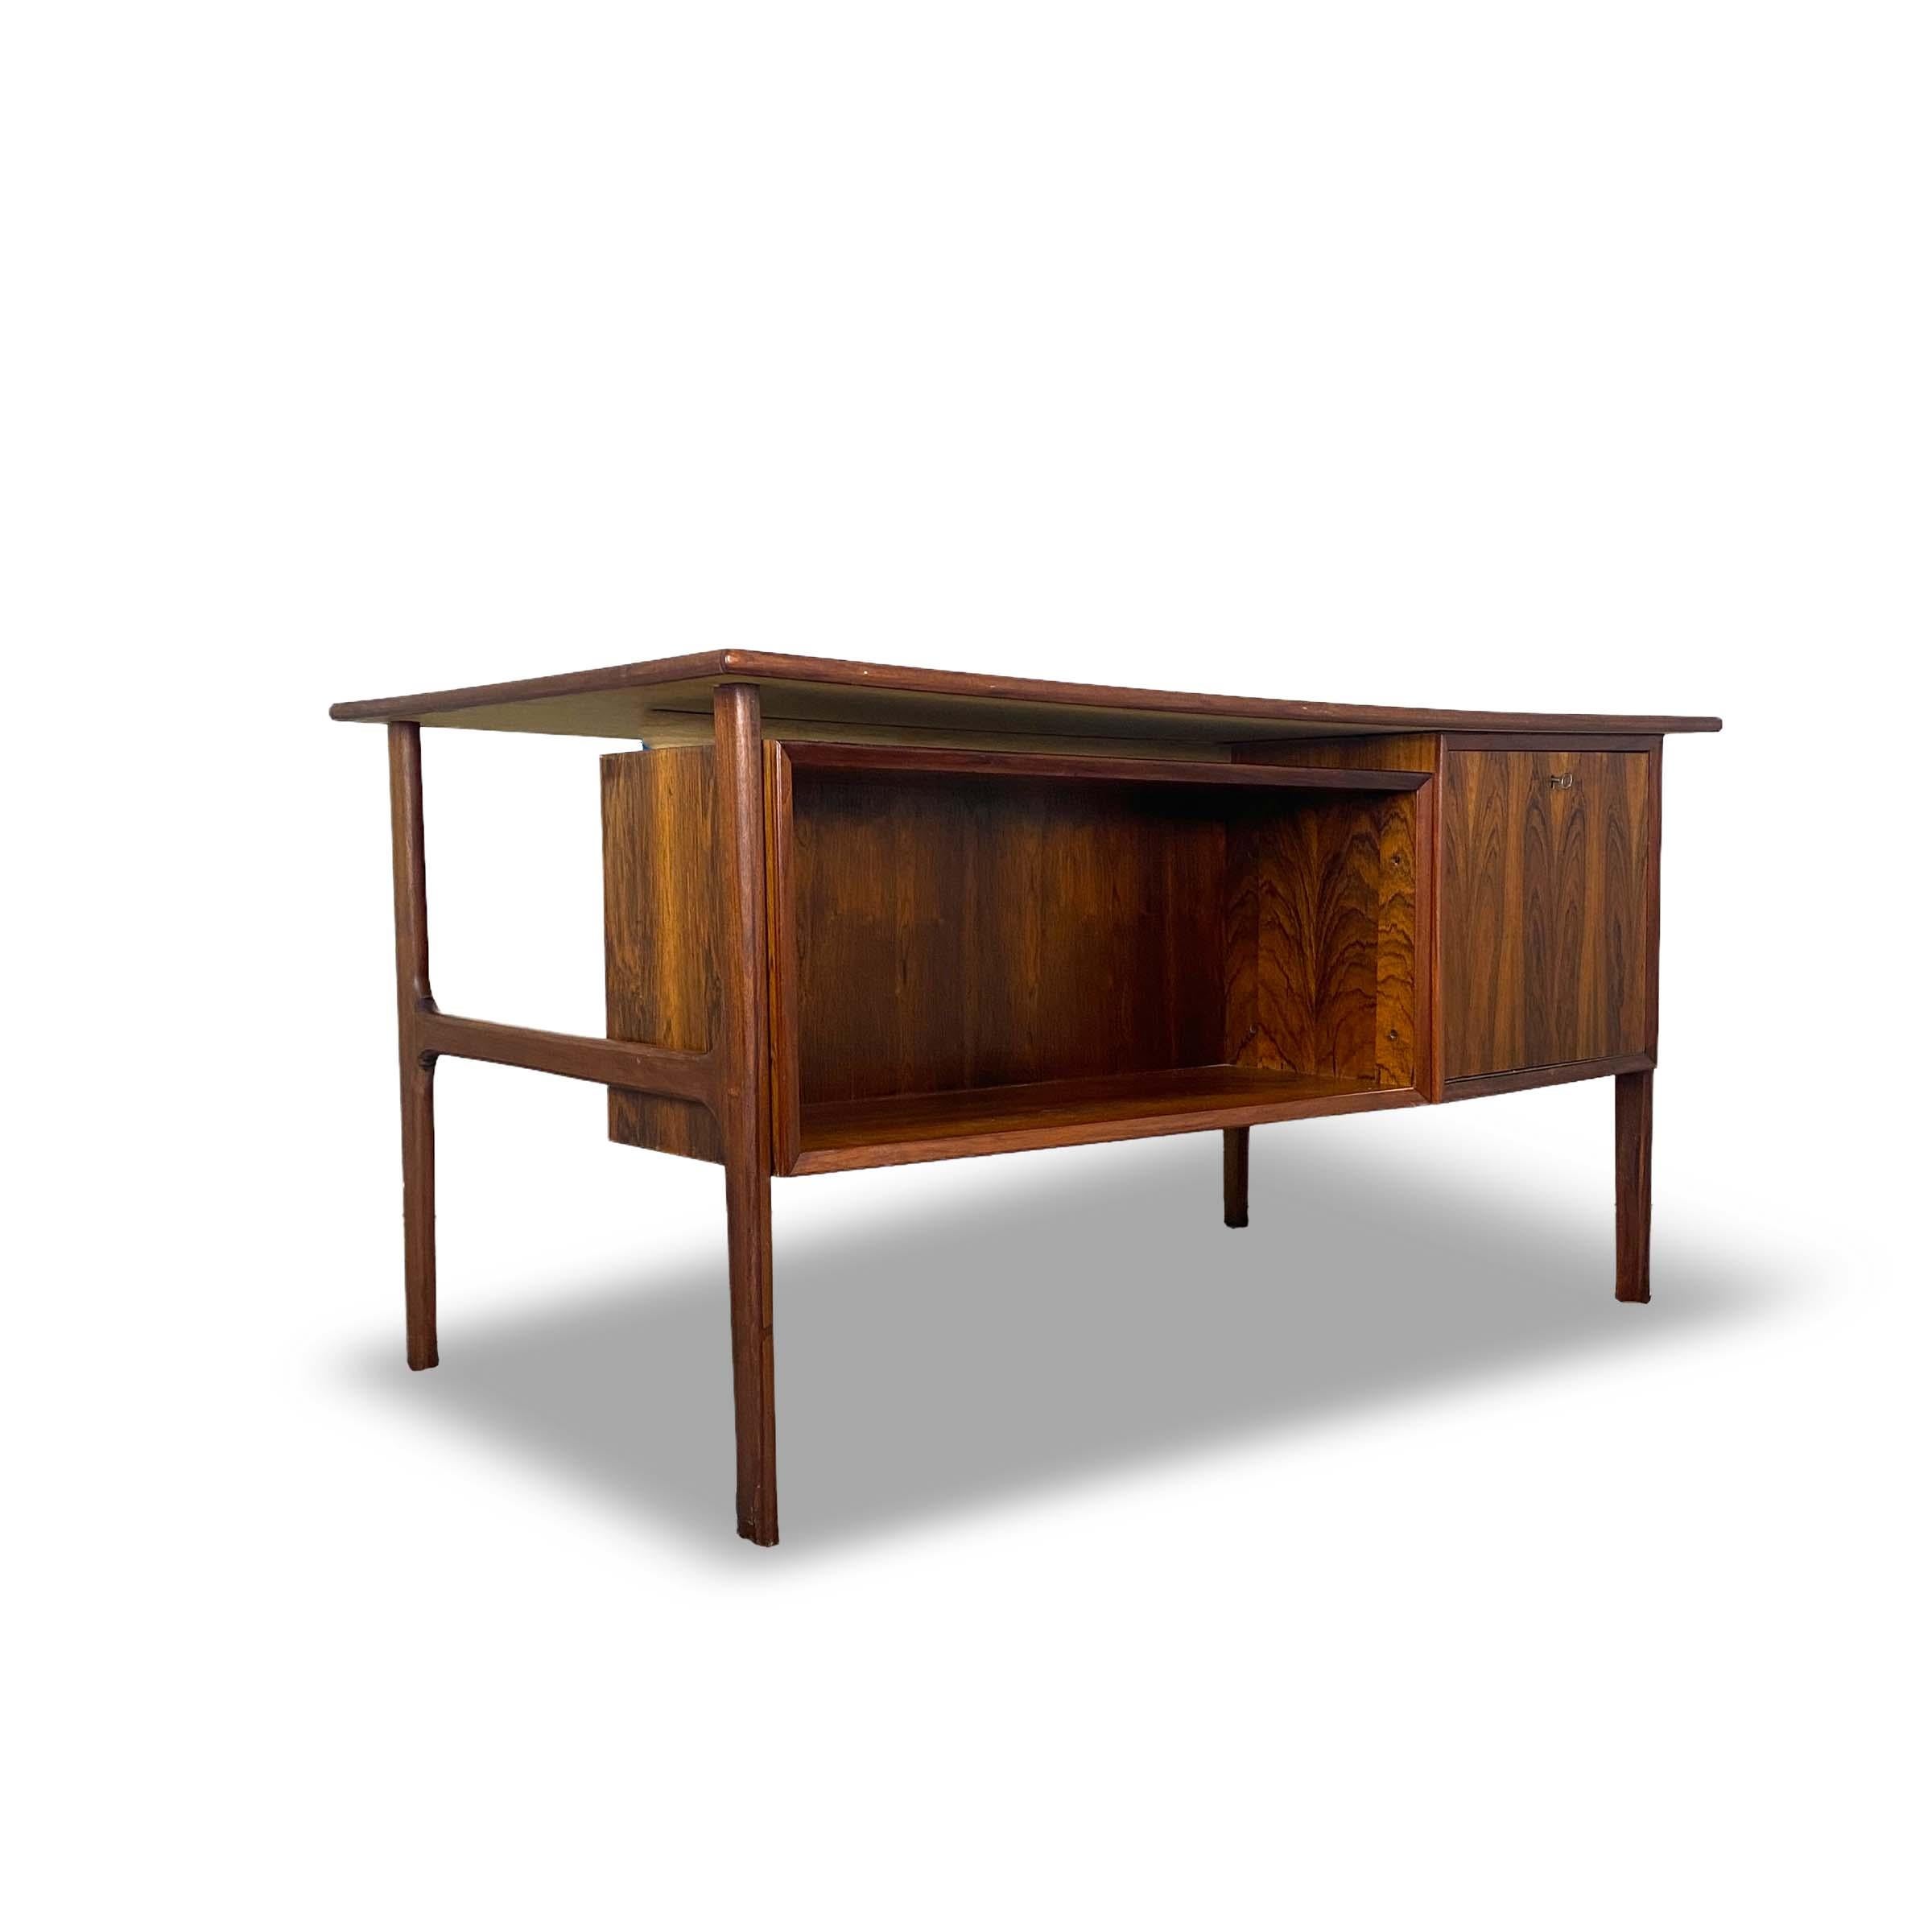 Condition: Great Vintage Condition

Dimensions: 55” L x 32.25” D x 28.5” H (28” H Leg Room, 33” L Leg Room)

Description: Gorgeously designed Danish rosewood desk. Made in Denmark, circa 1960s. Door in back drops down for bar access. Keys included.